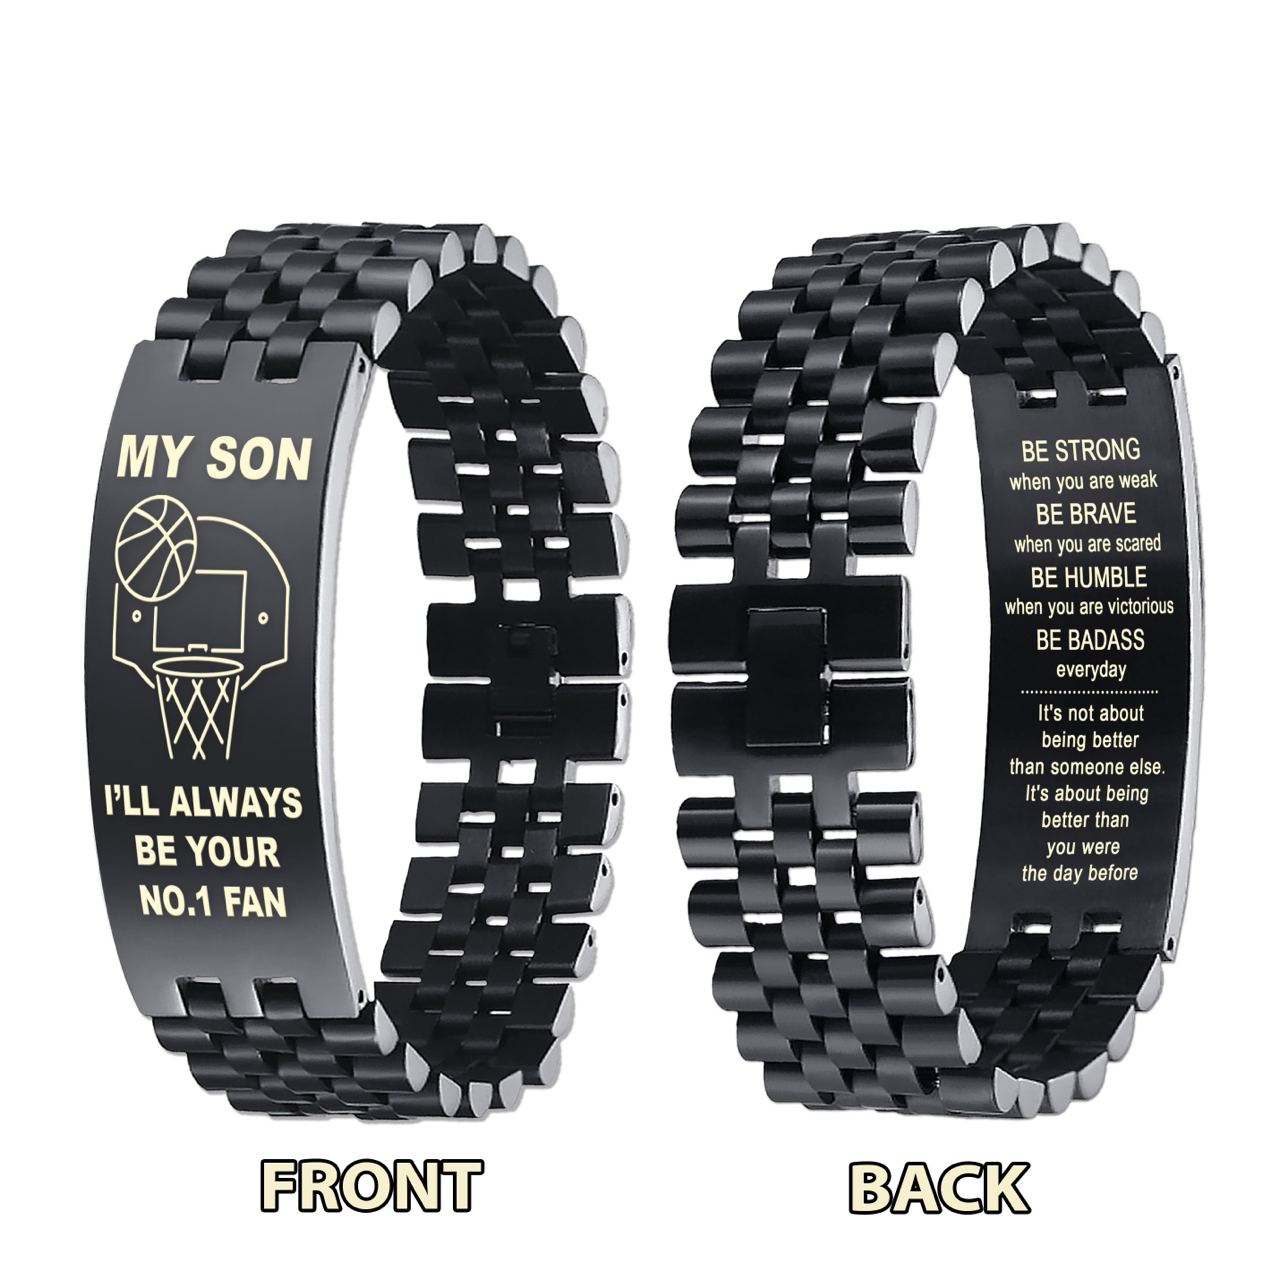 DS4Customizable basketball bracelet, gifts from dad mom to son- I hope you believe in yourself